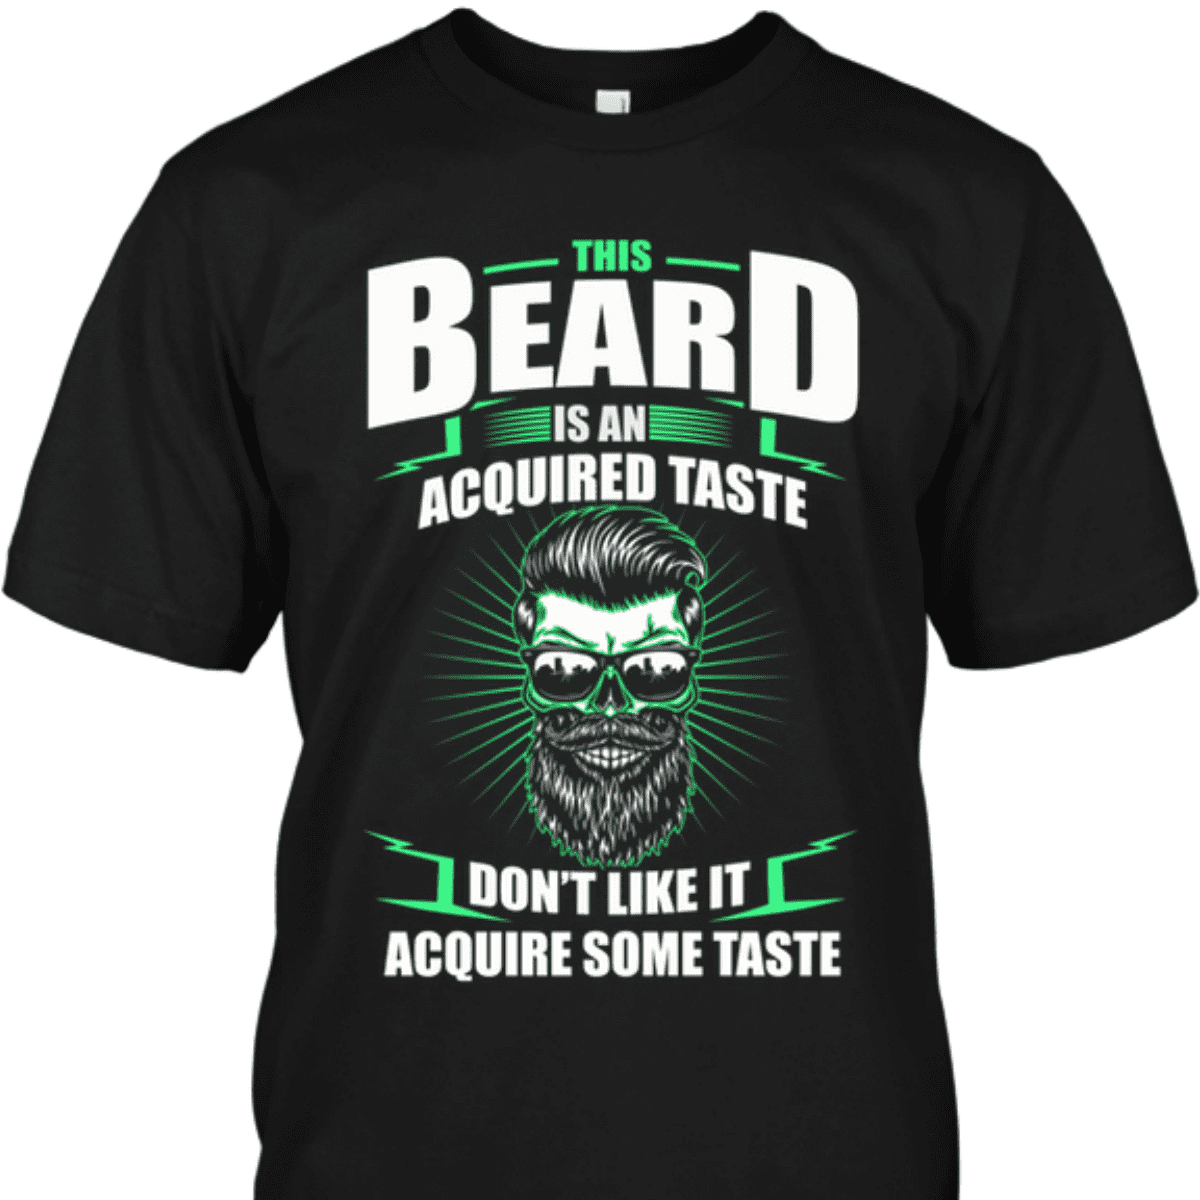 Evil Old Skull - this beard is an acquired taste don't like it acquired taste